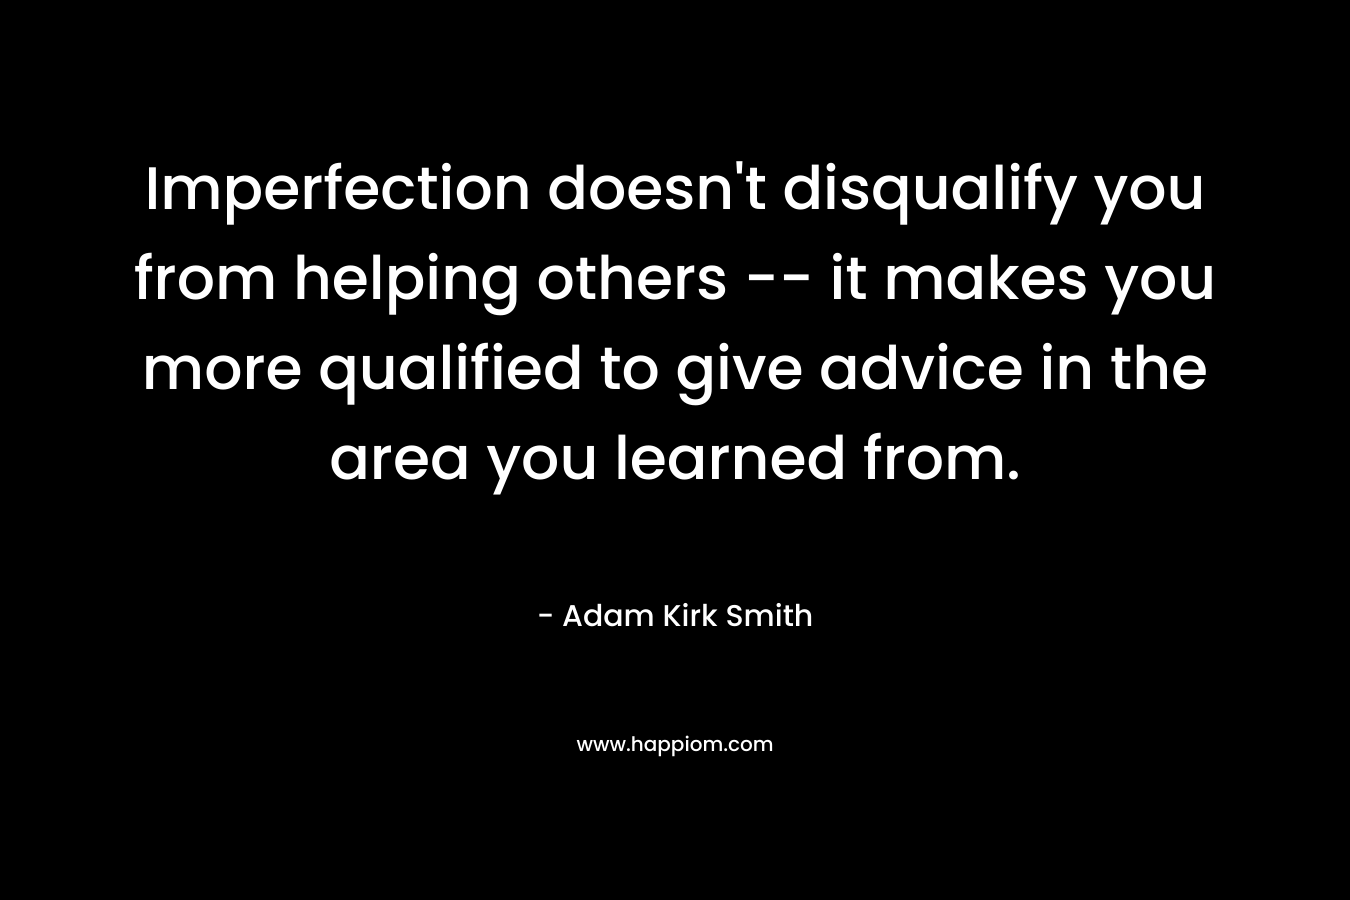 Imperfection doesn't disqualify you from helping others -- it makes you more qualified to give advice in the area you learned from.